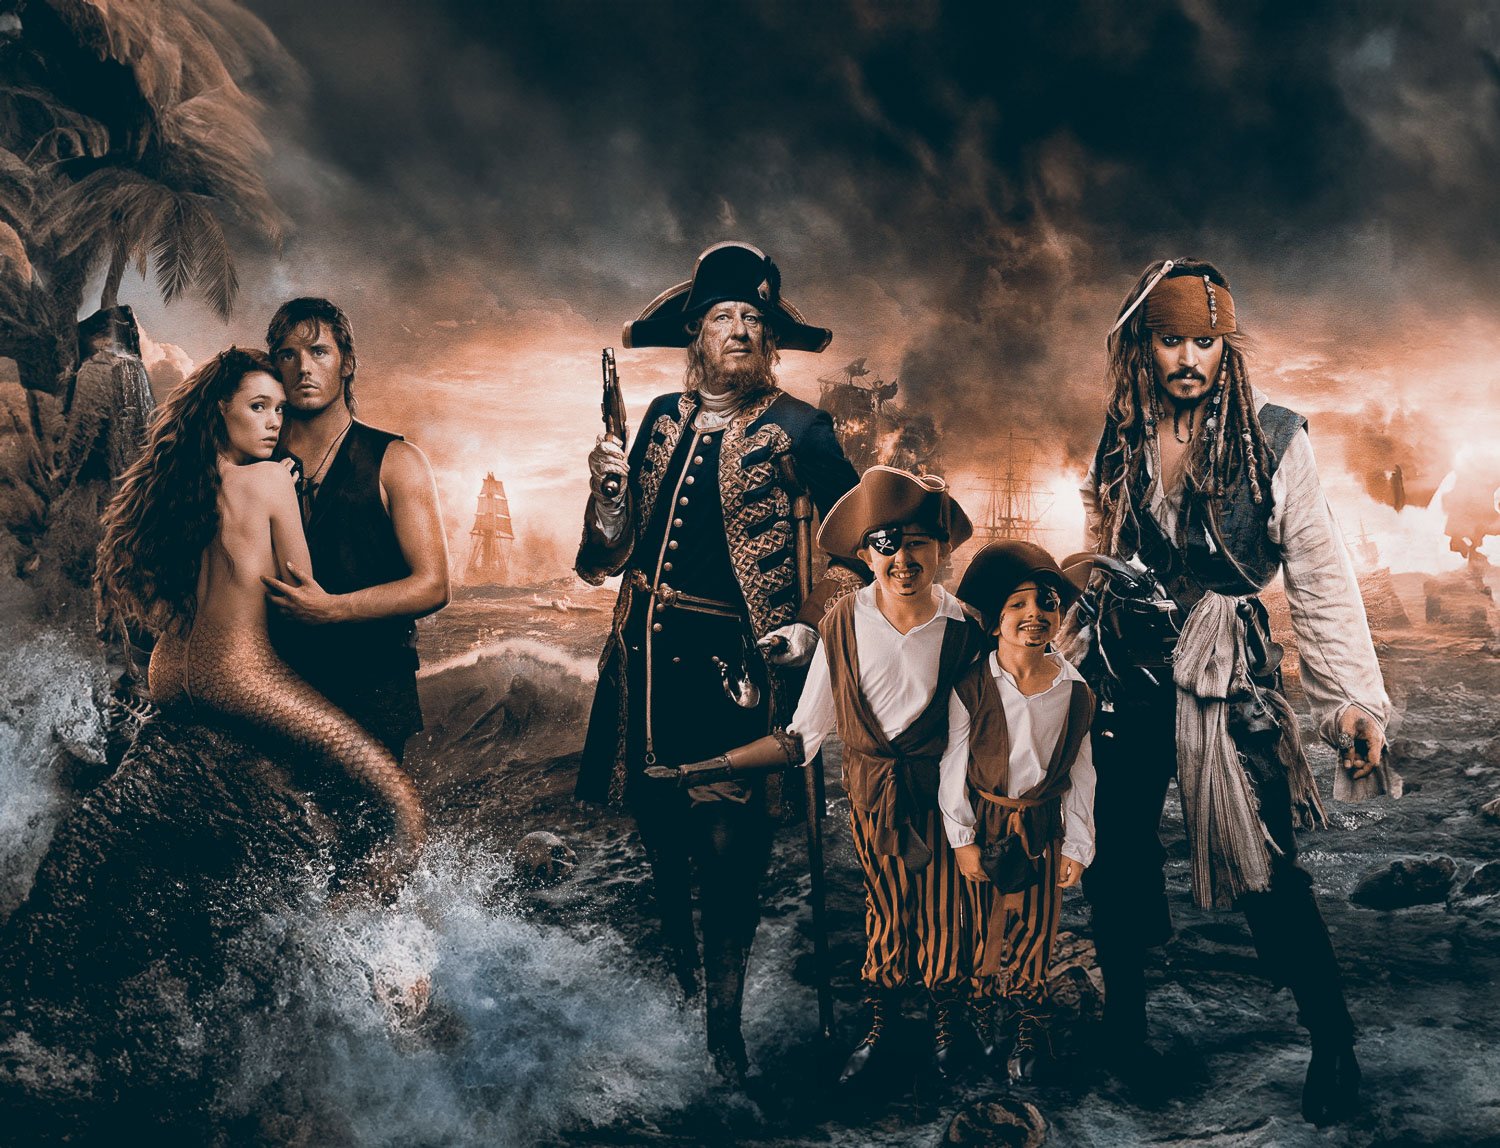 Two boys dressed as pirates in Pirates of the Caribbean background